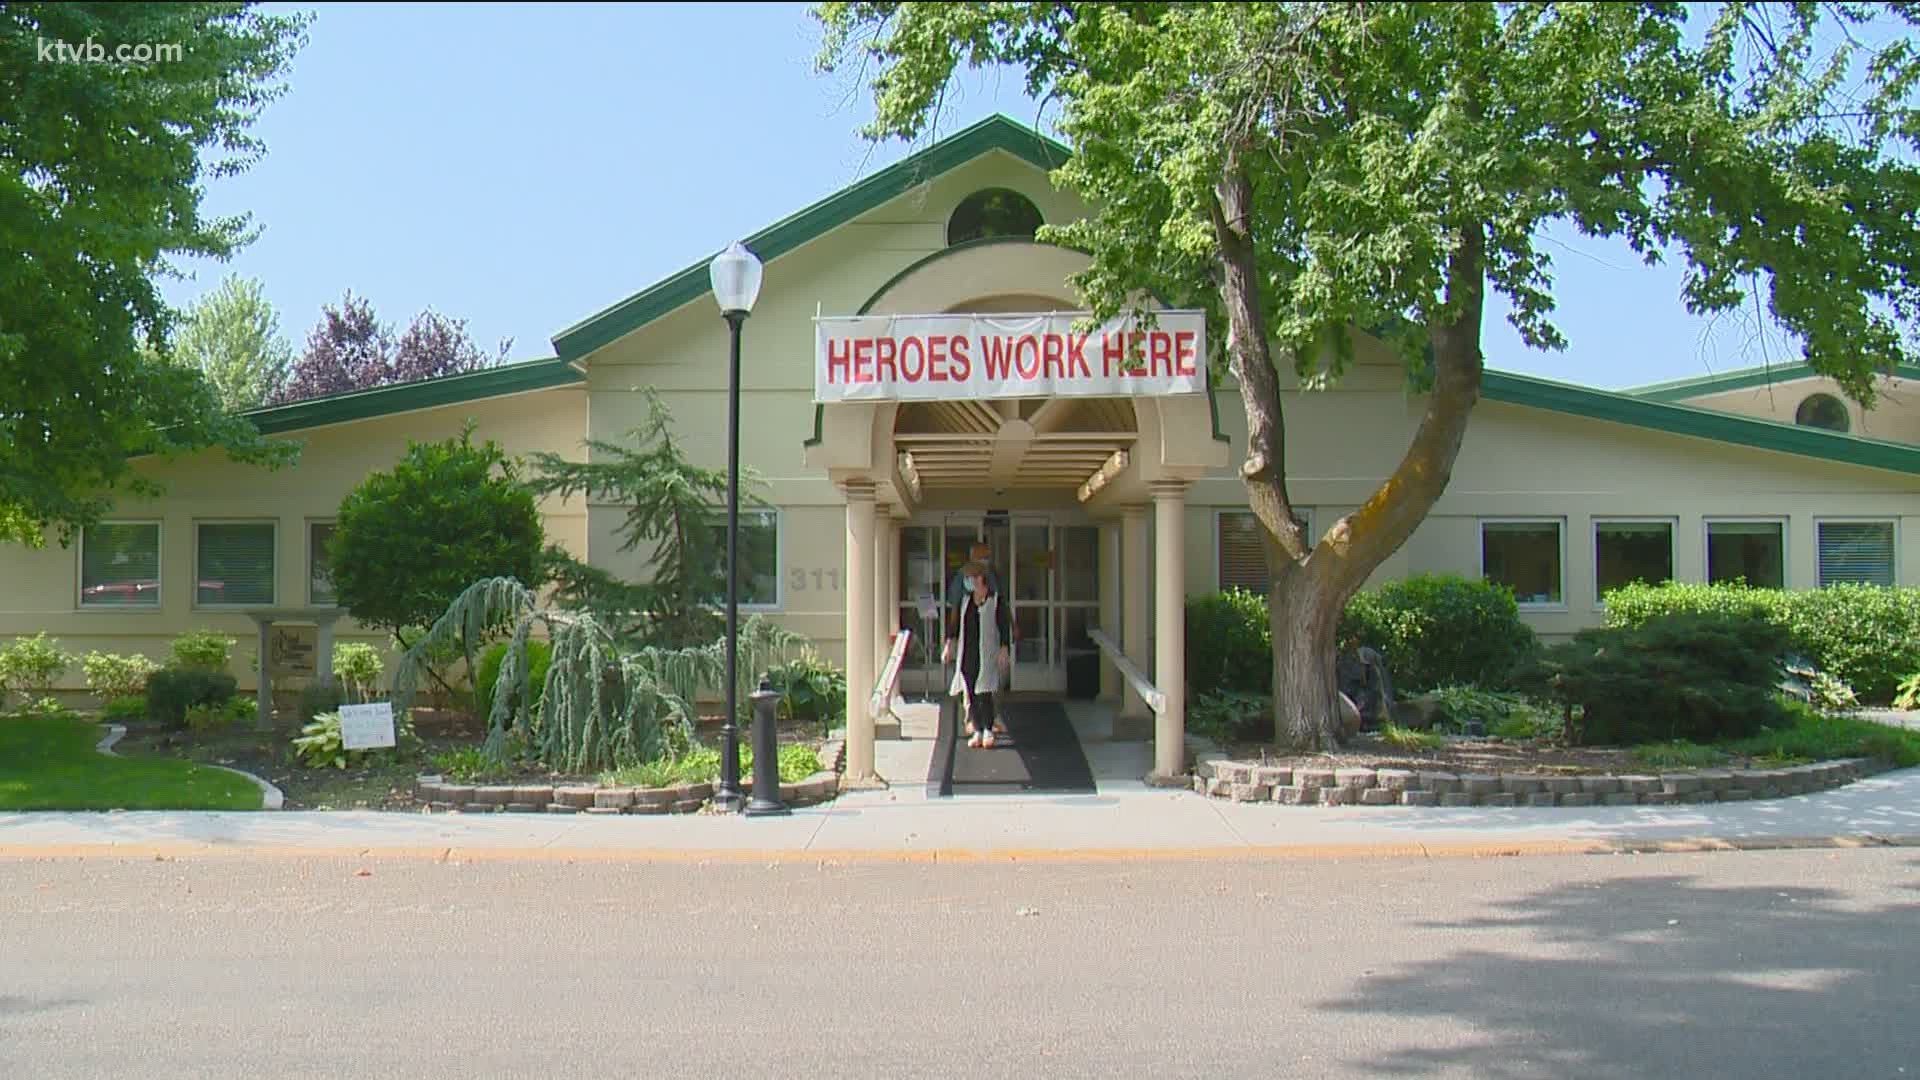 With Ada County still operating under Stage 3, visitors are not allowed at long-term care facilities. We talked with a Boise woman who is pushing for a change.